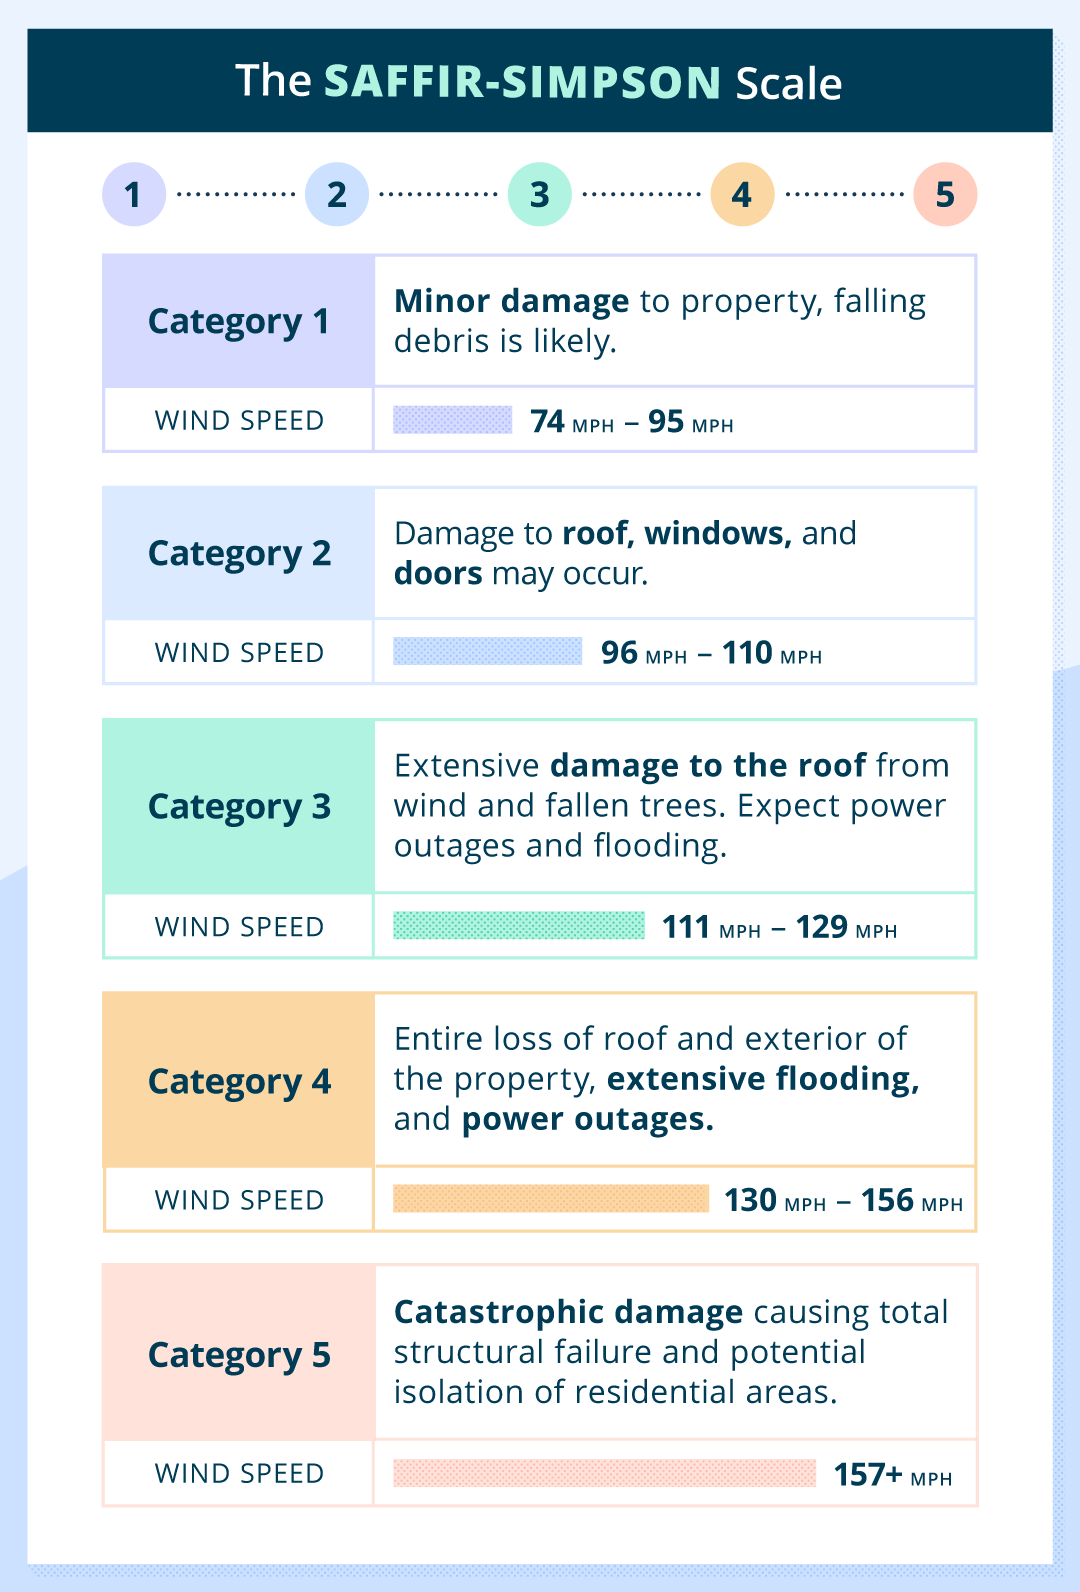 An image of the Saffir-Simpson scale denoting the five categories, anticipated impacts of each, and qualifying windspeeds.